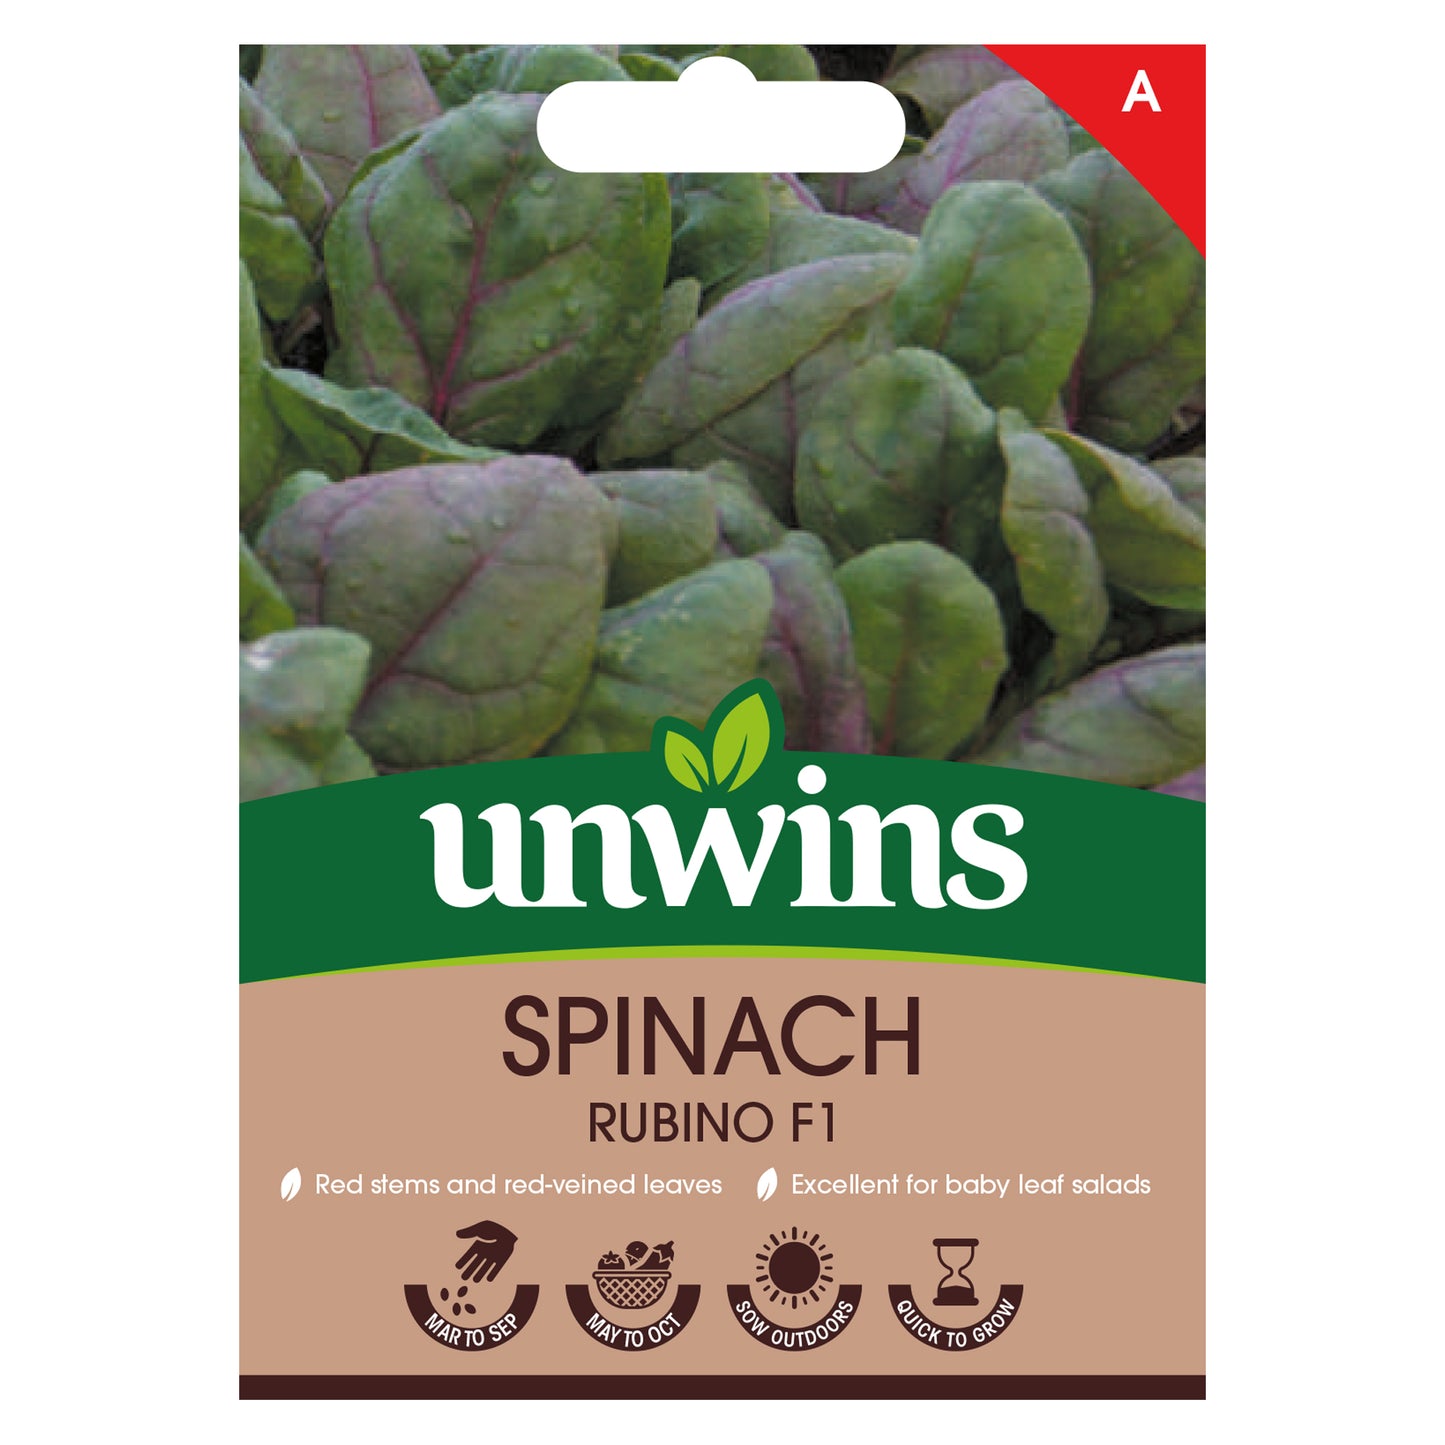 Unwins Spinach Rubino F1 Seeds front of pack